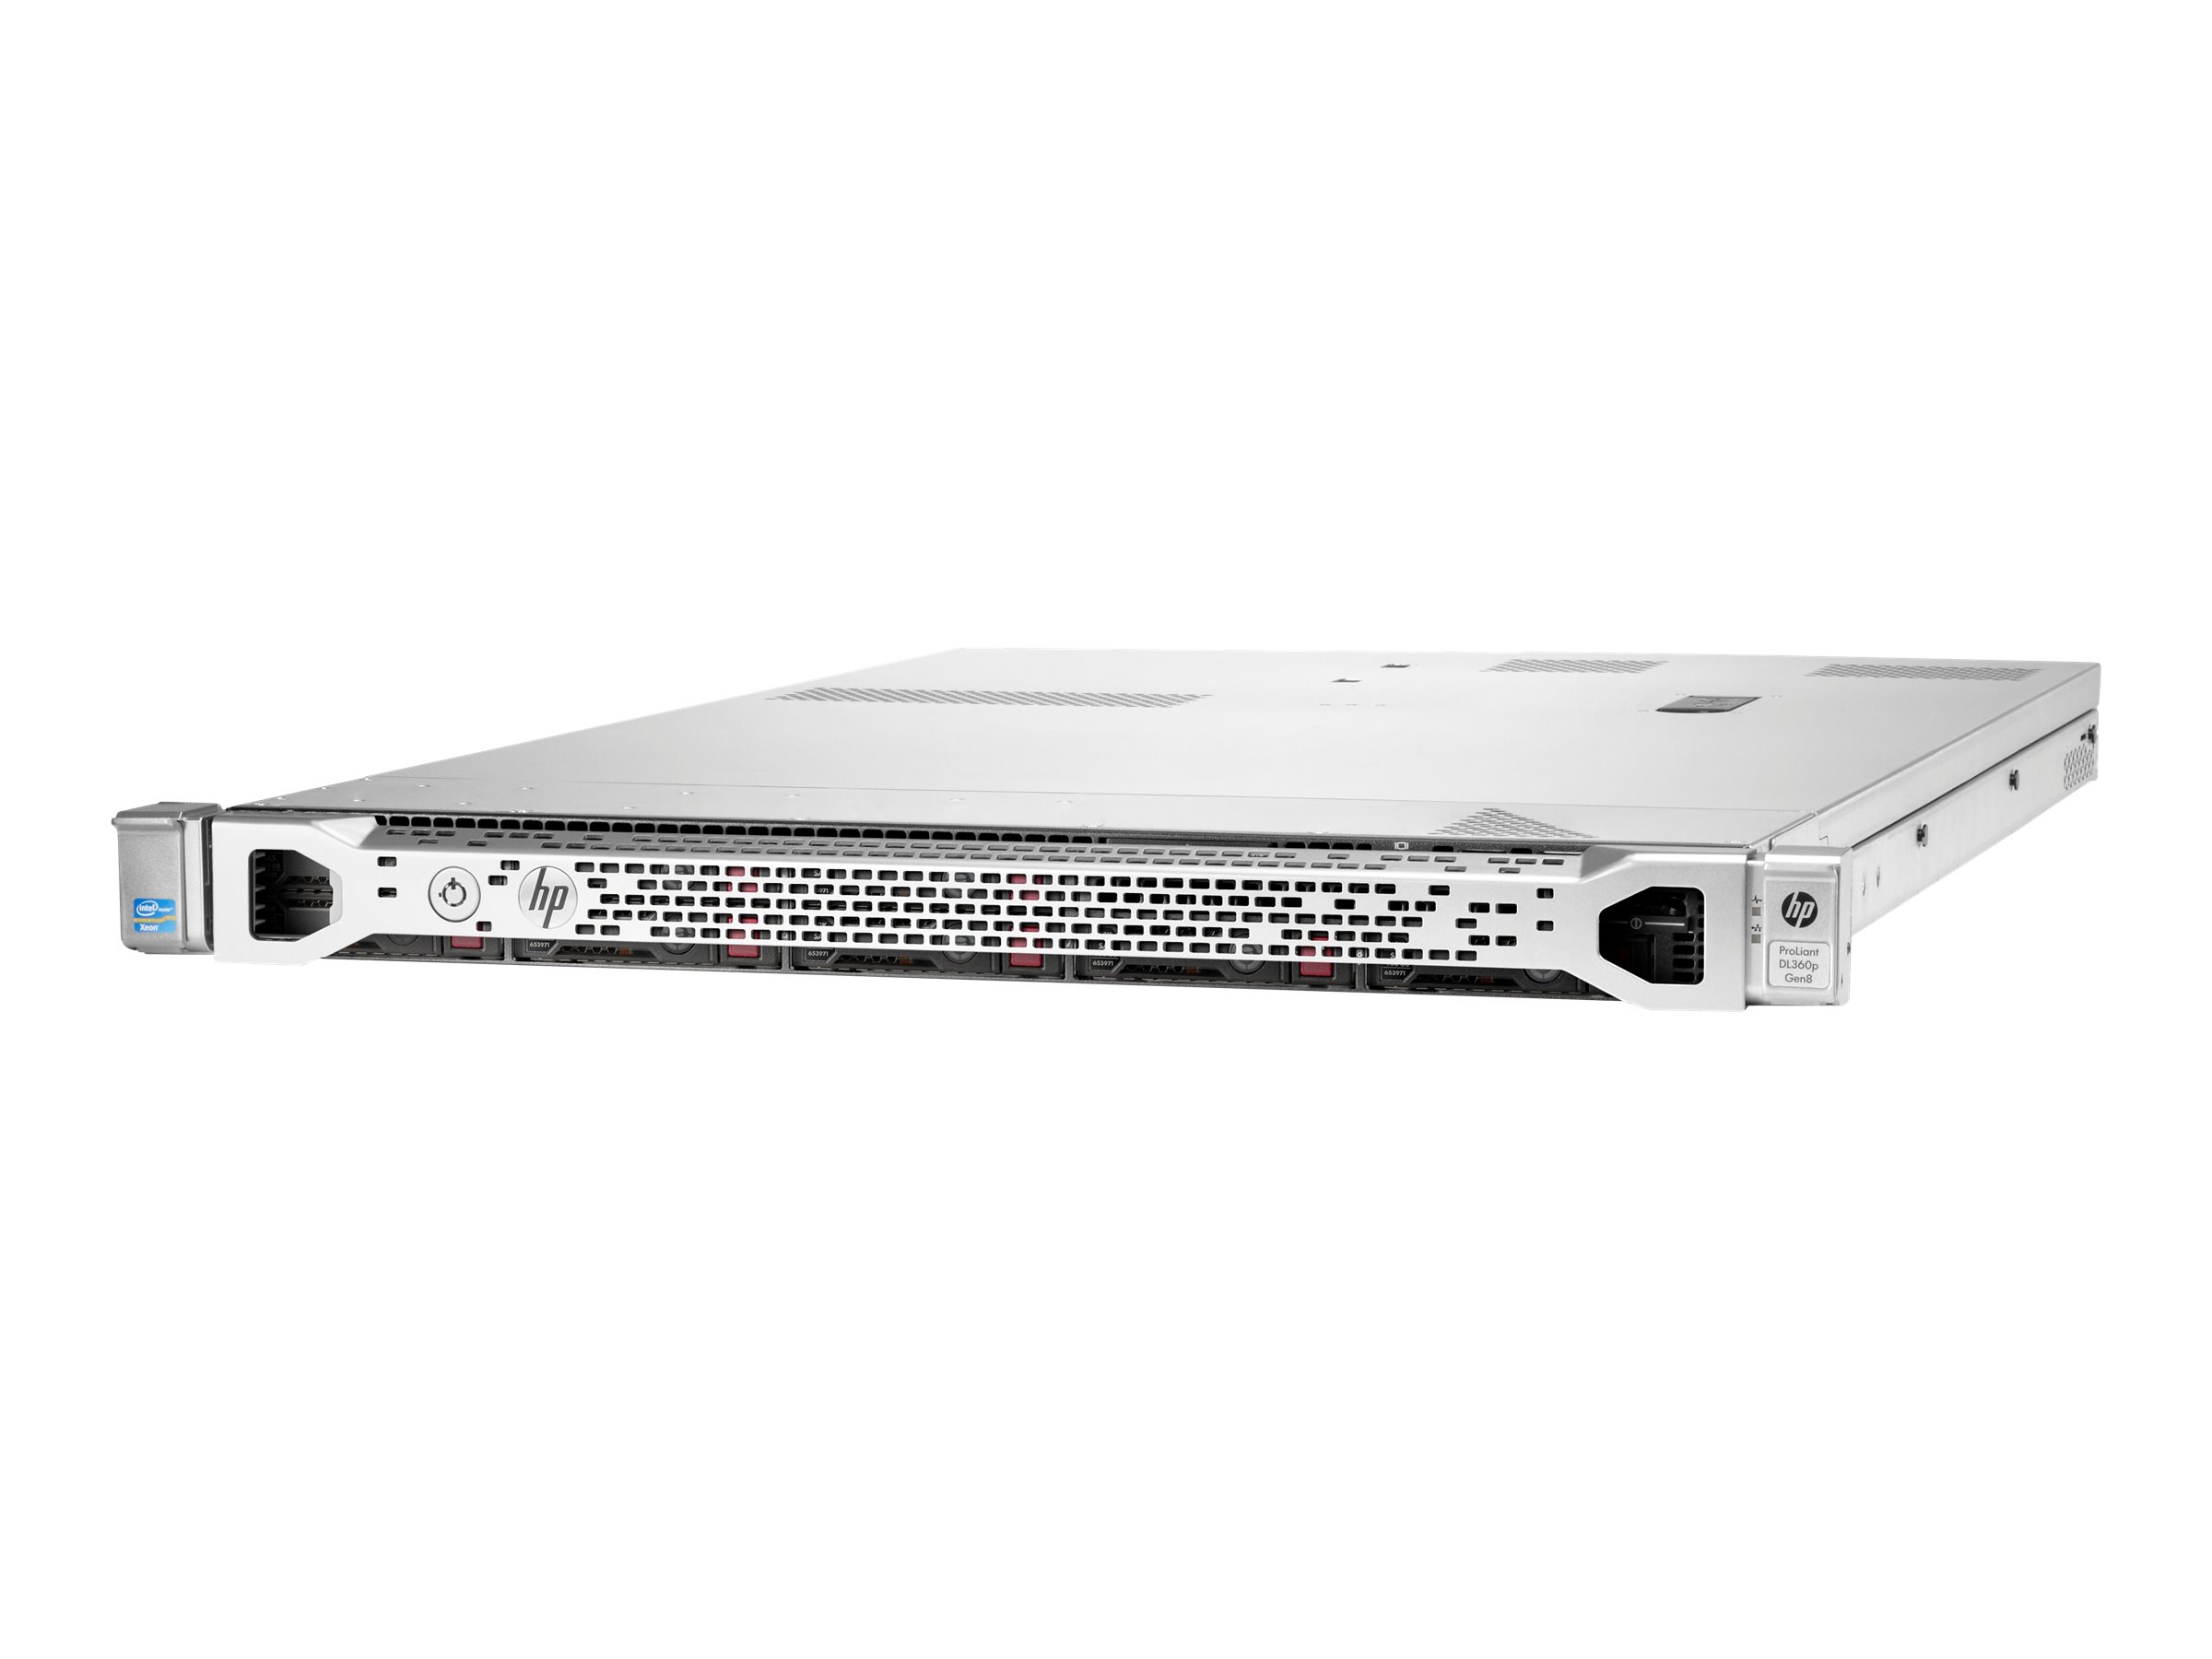 HP DL360P G8 P420I 4*LFF CTO CHASSIS (655651-B21)